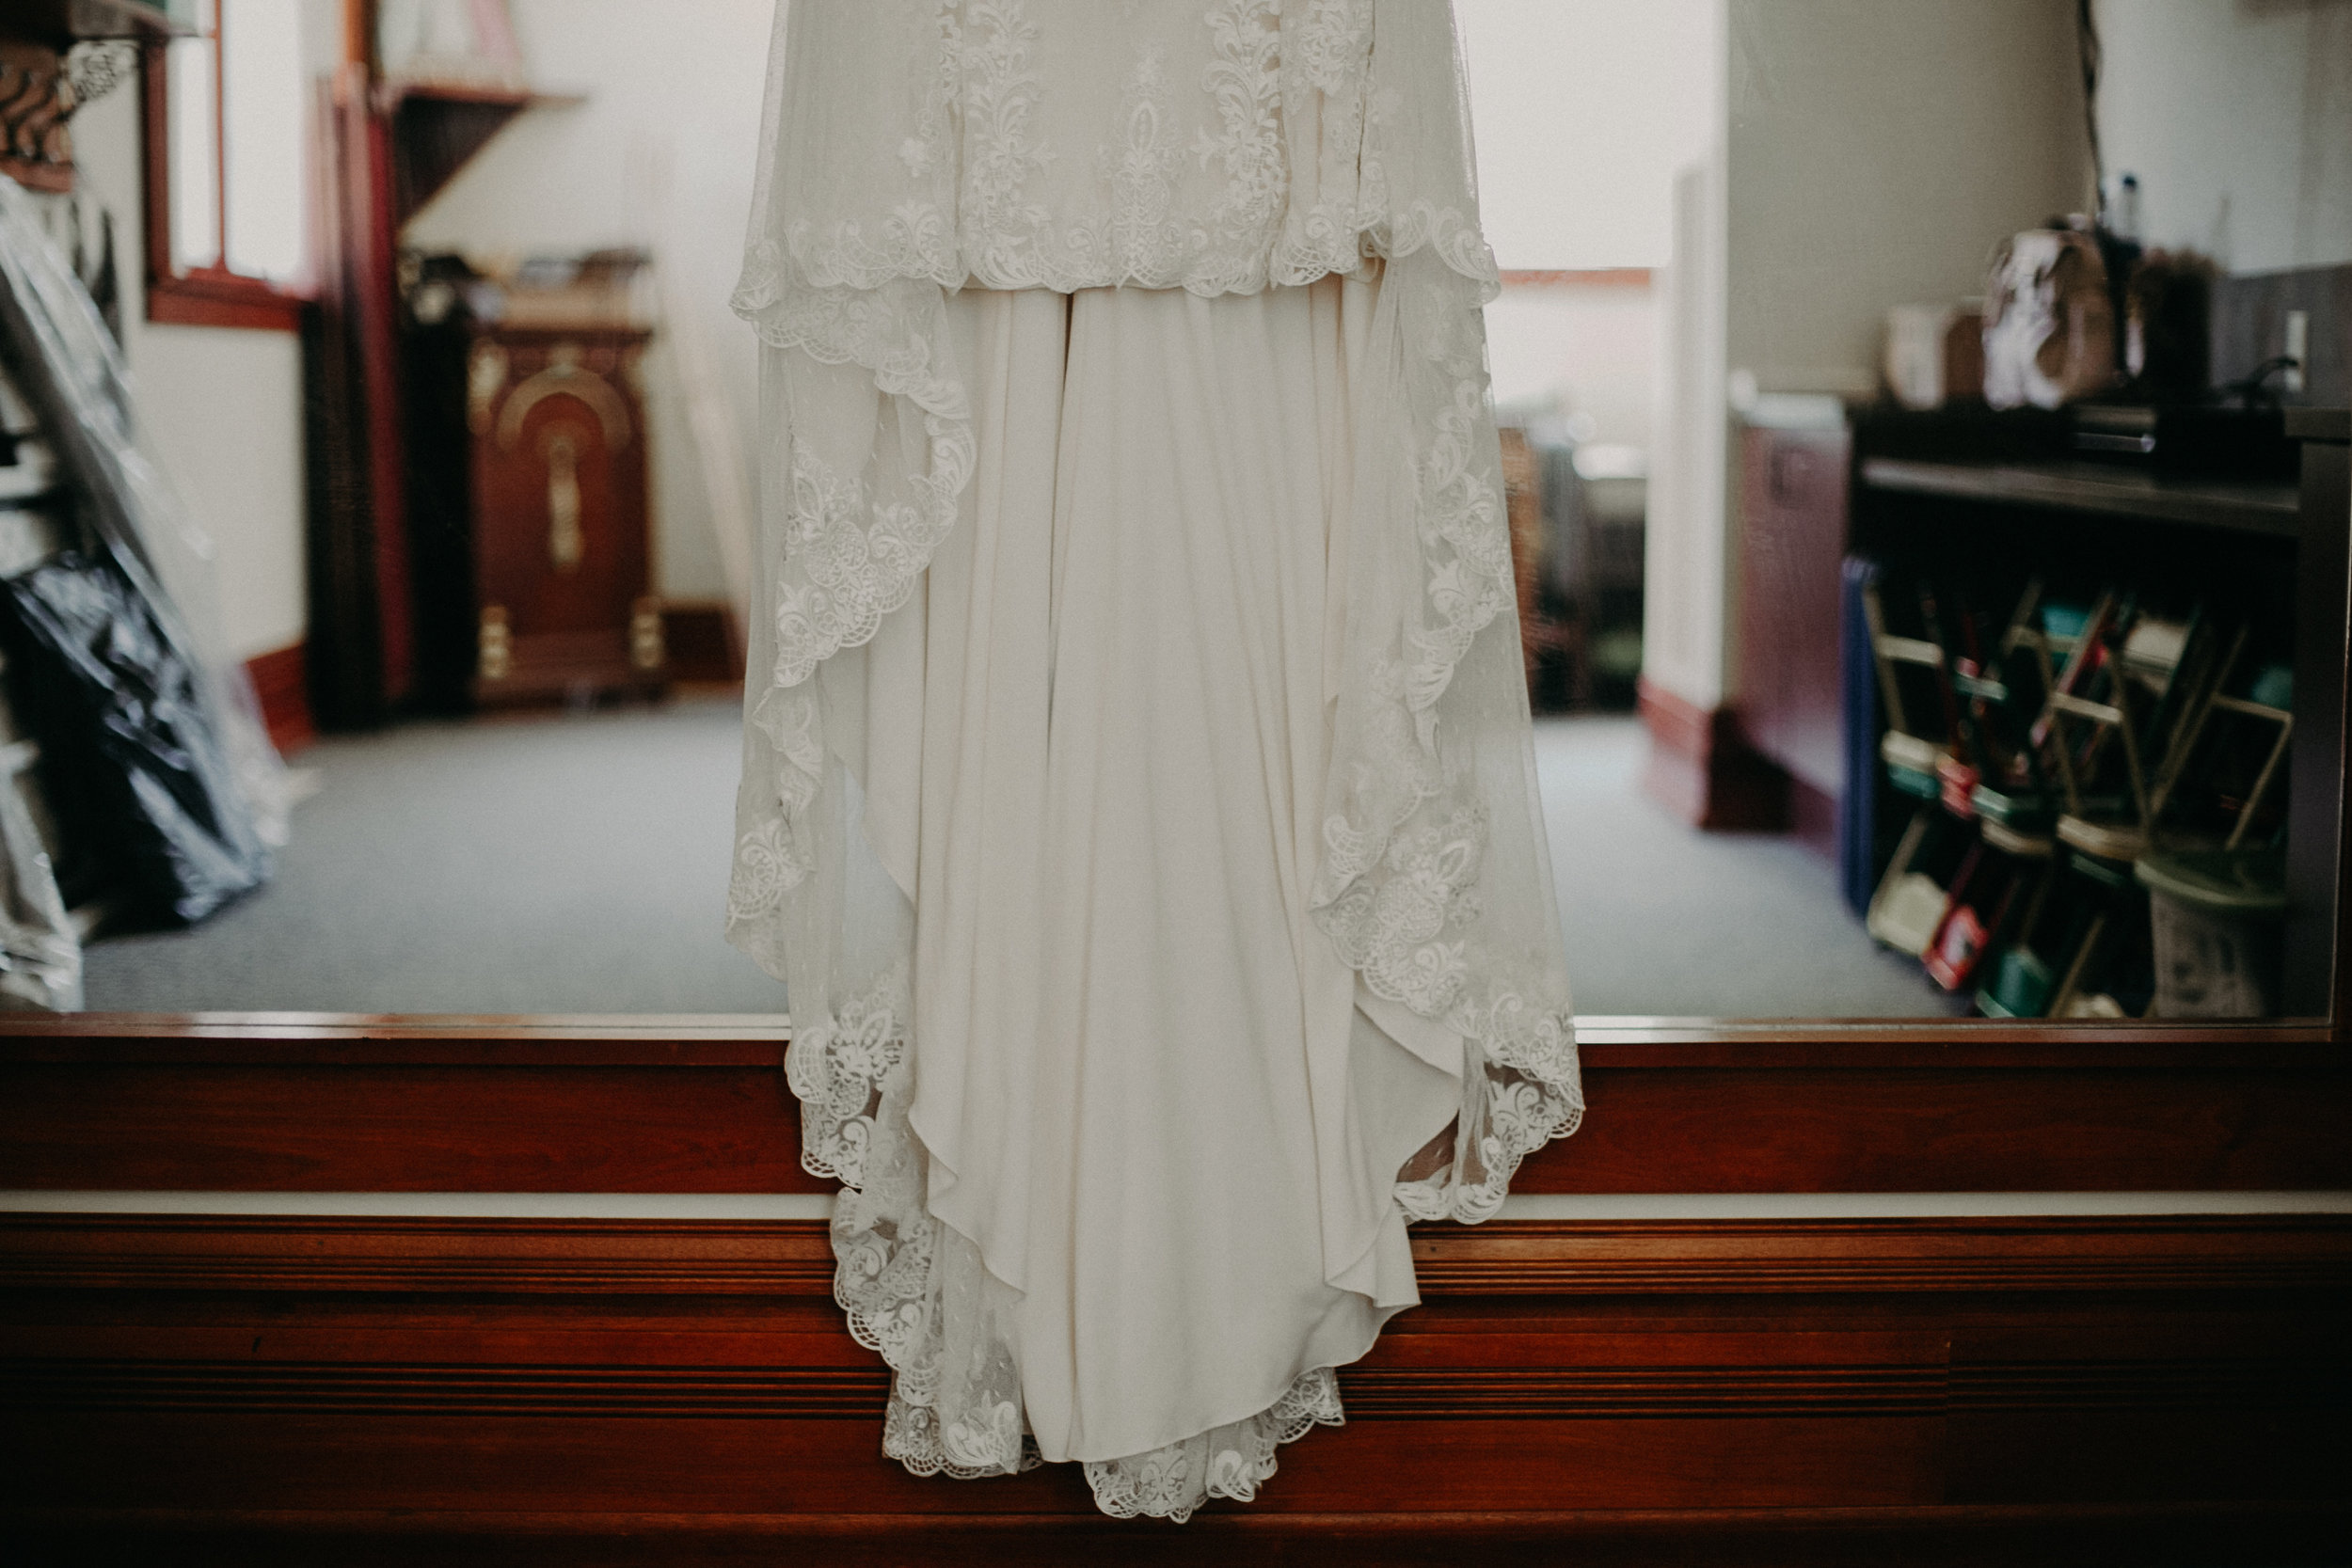  Justin Alexander lace wedding dress hanging in St Johns Catholic Church in Marshfield WI wedding by Andrea Wagner 